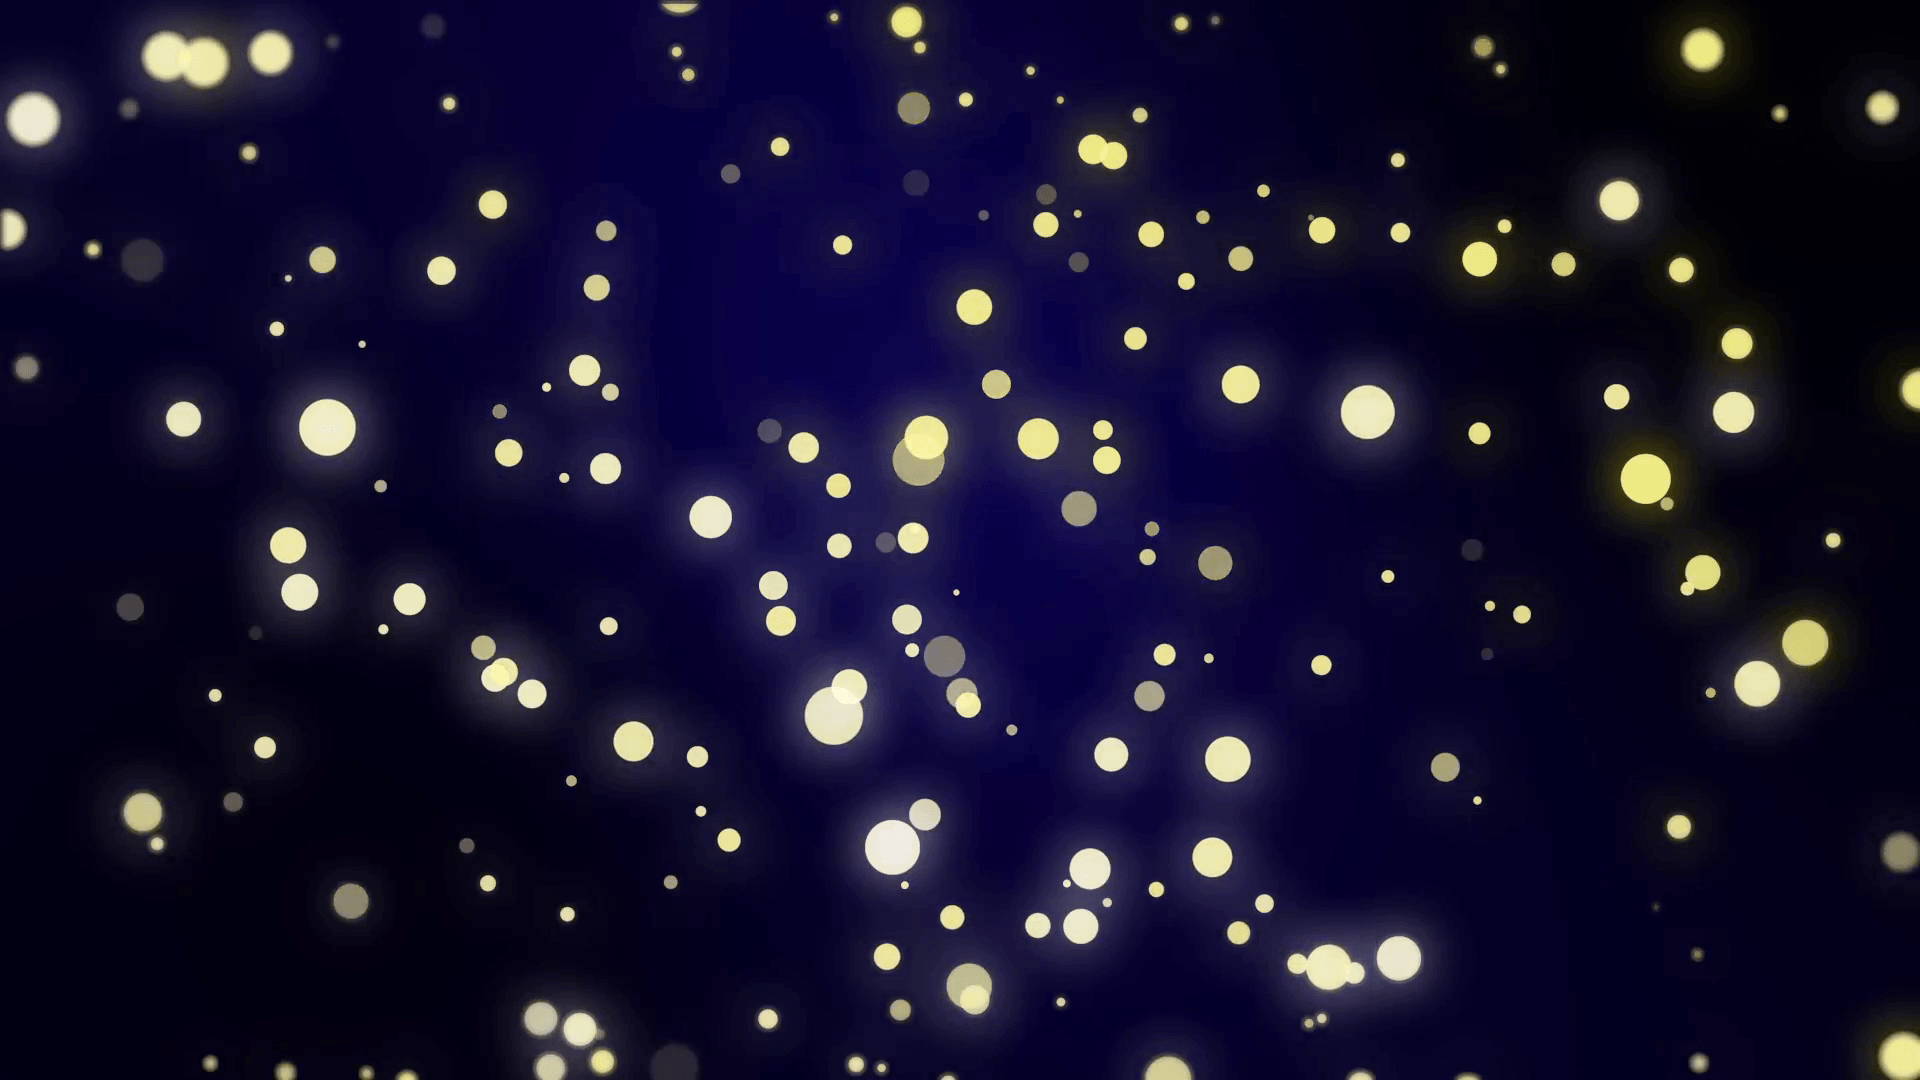 Night sky full of stars animation made of sparkly light particles